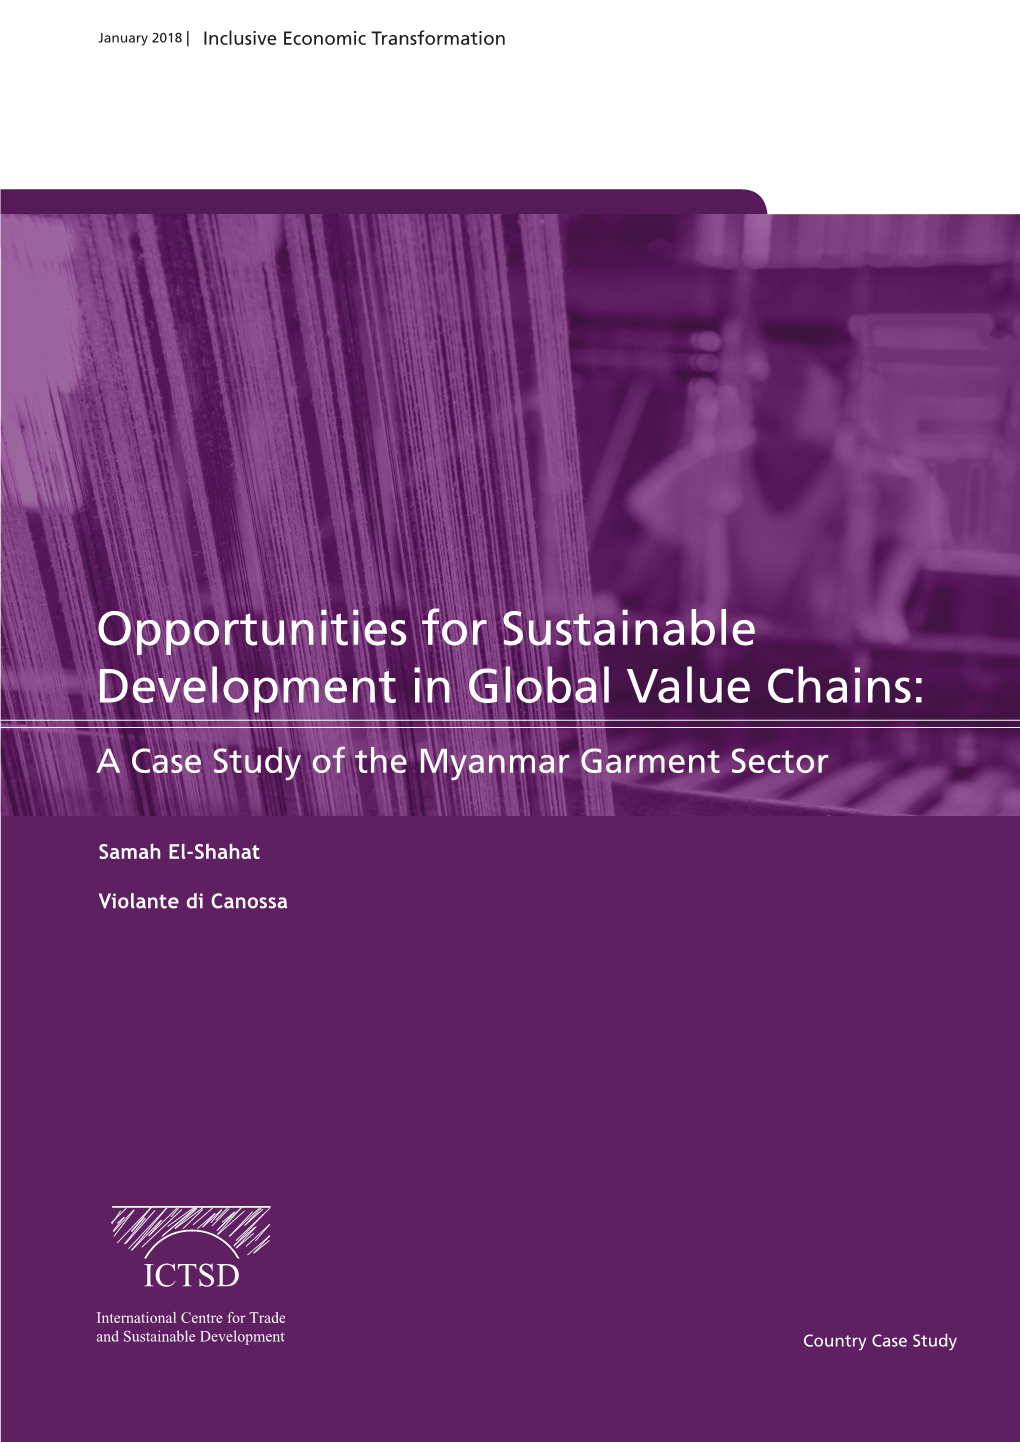 Opportunities for Sustainable Development in Global Value Chains: a Case Study of the Myanmar Garment Sector